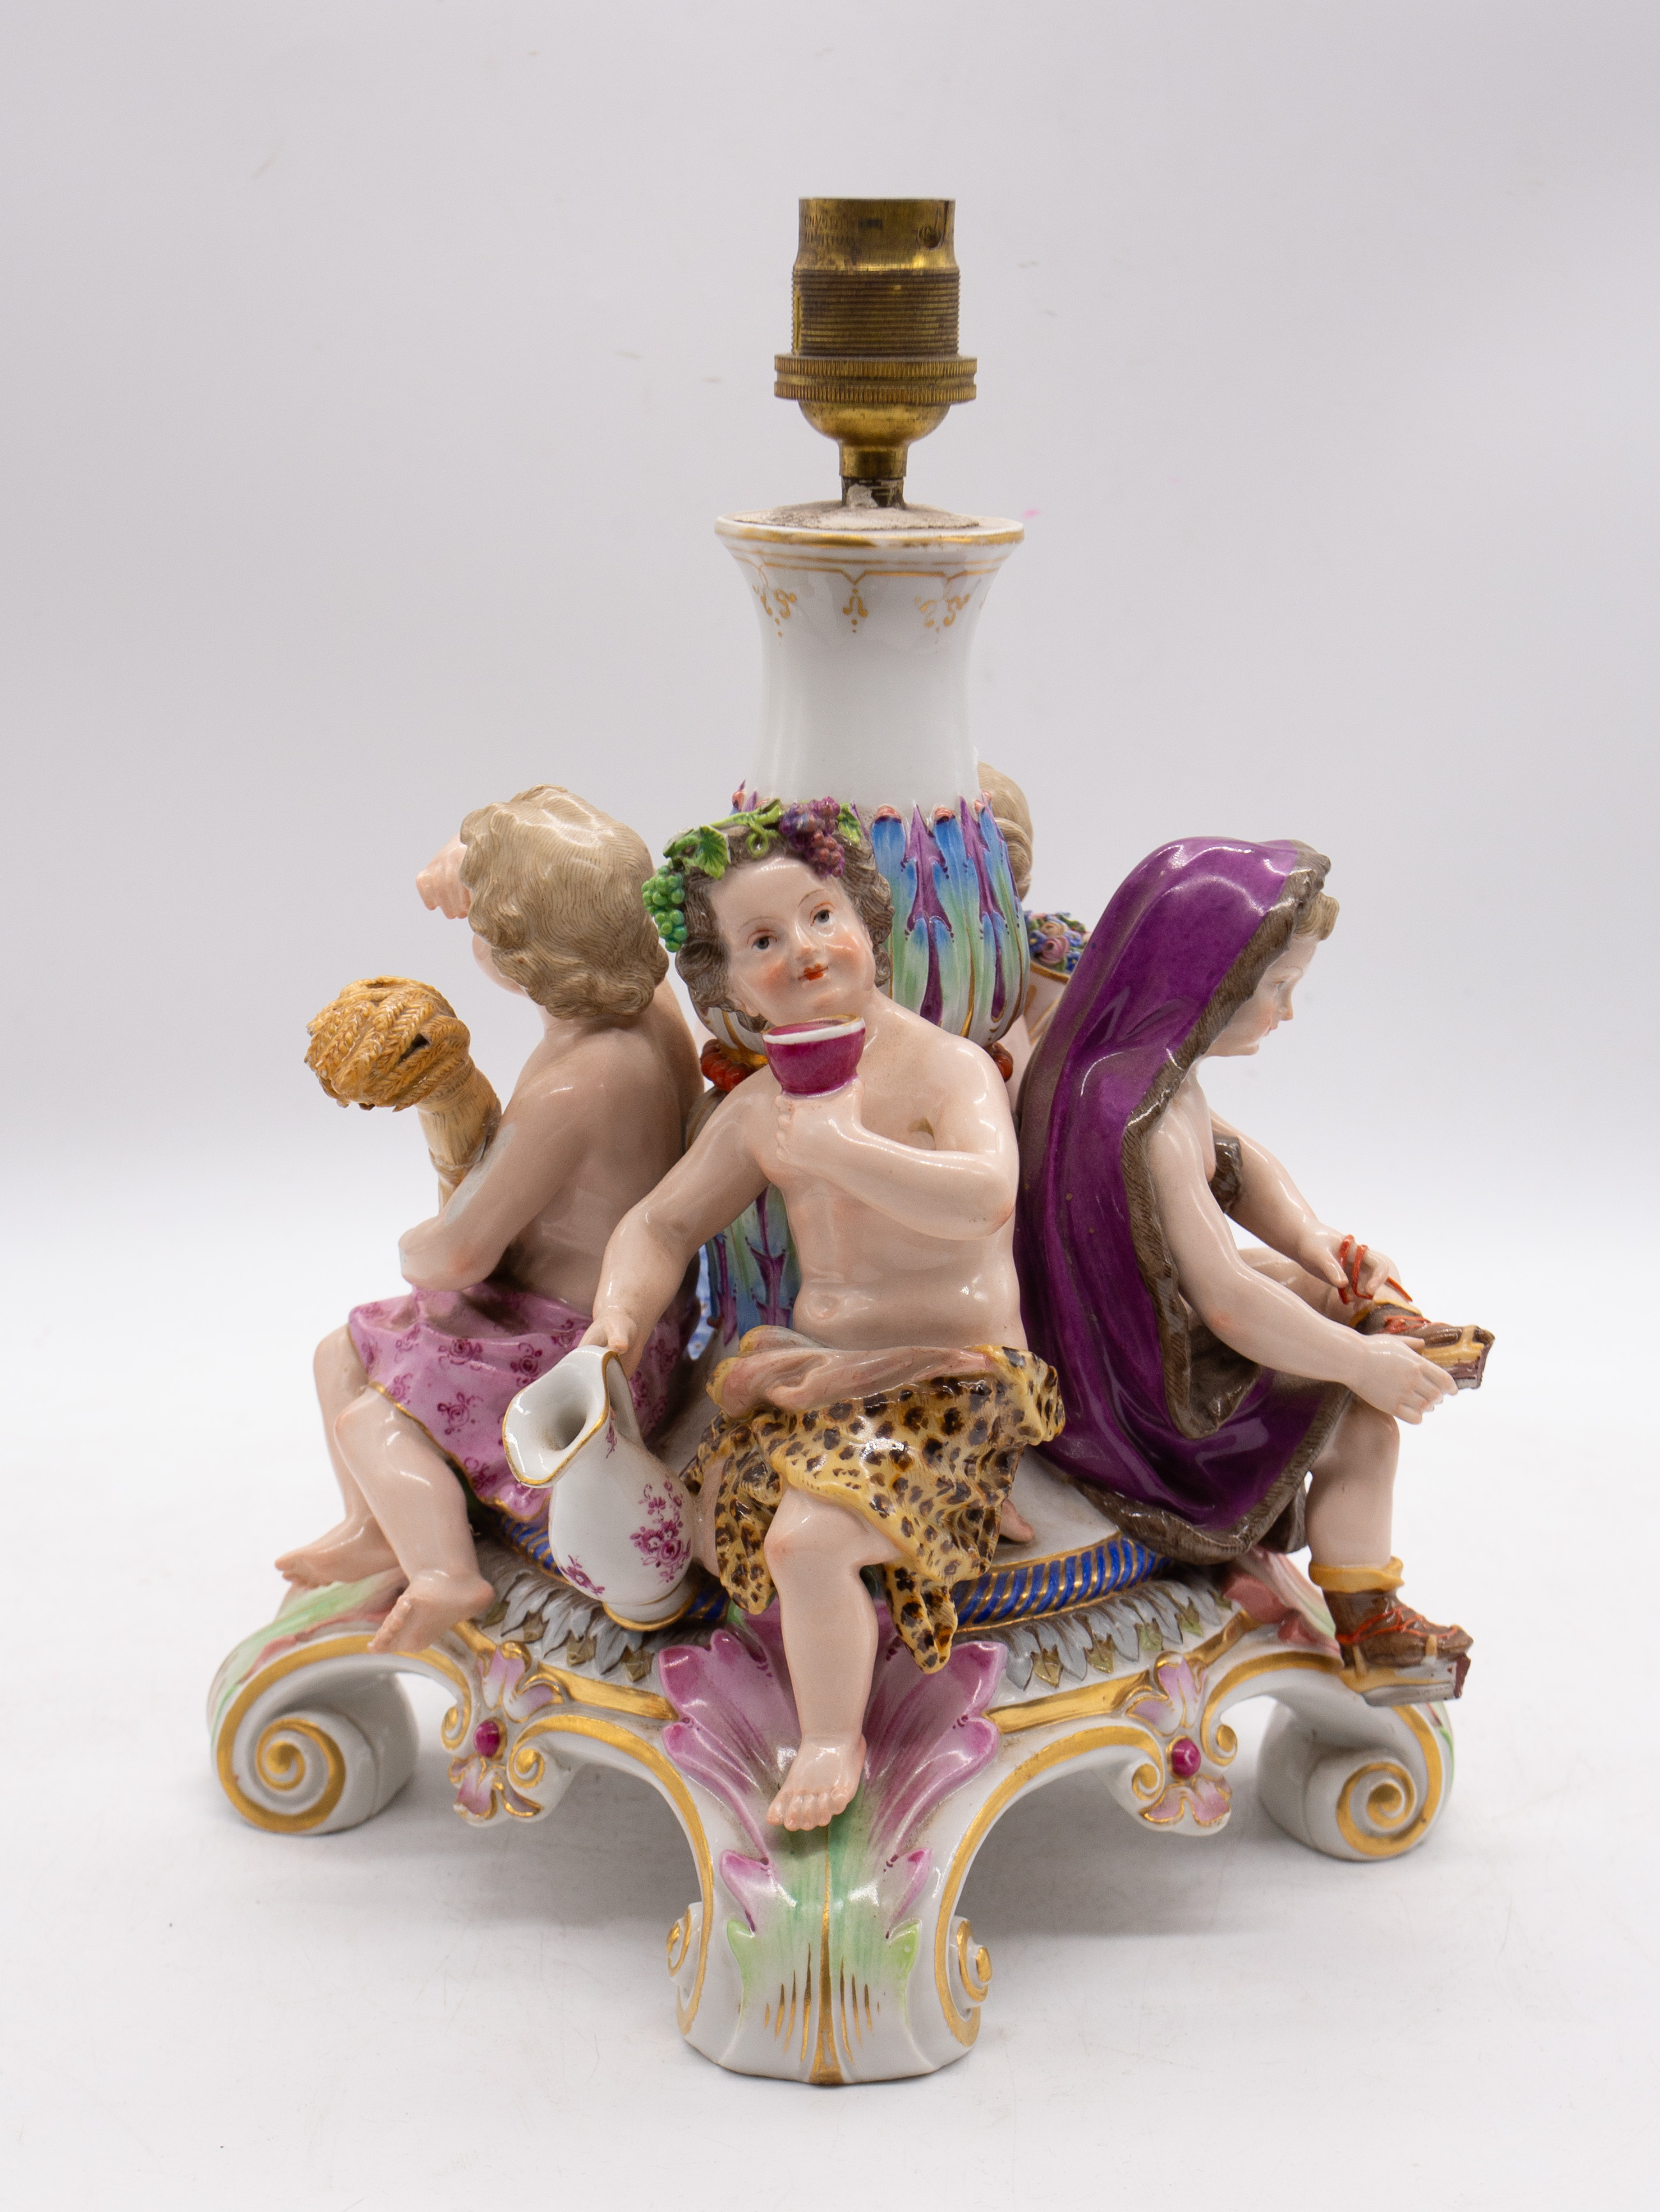 Meissen - A 19th century painted ceramic comport base, broken in the past and turned into lamp base. - Image 5 of 6